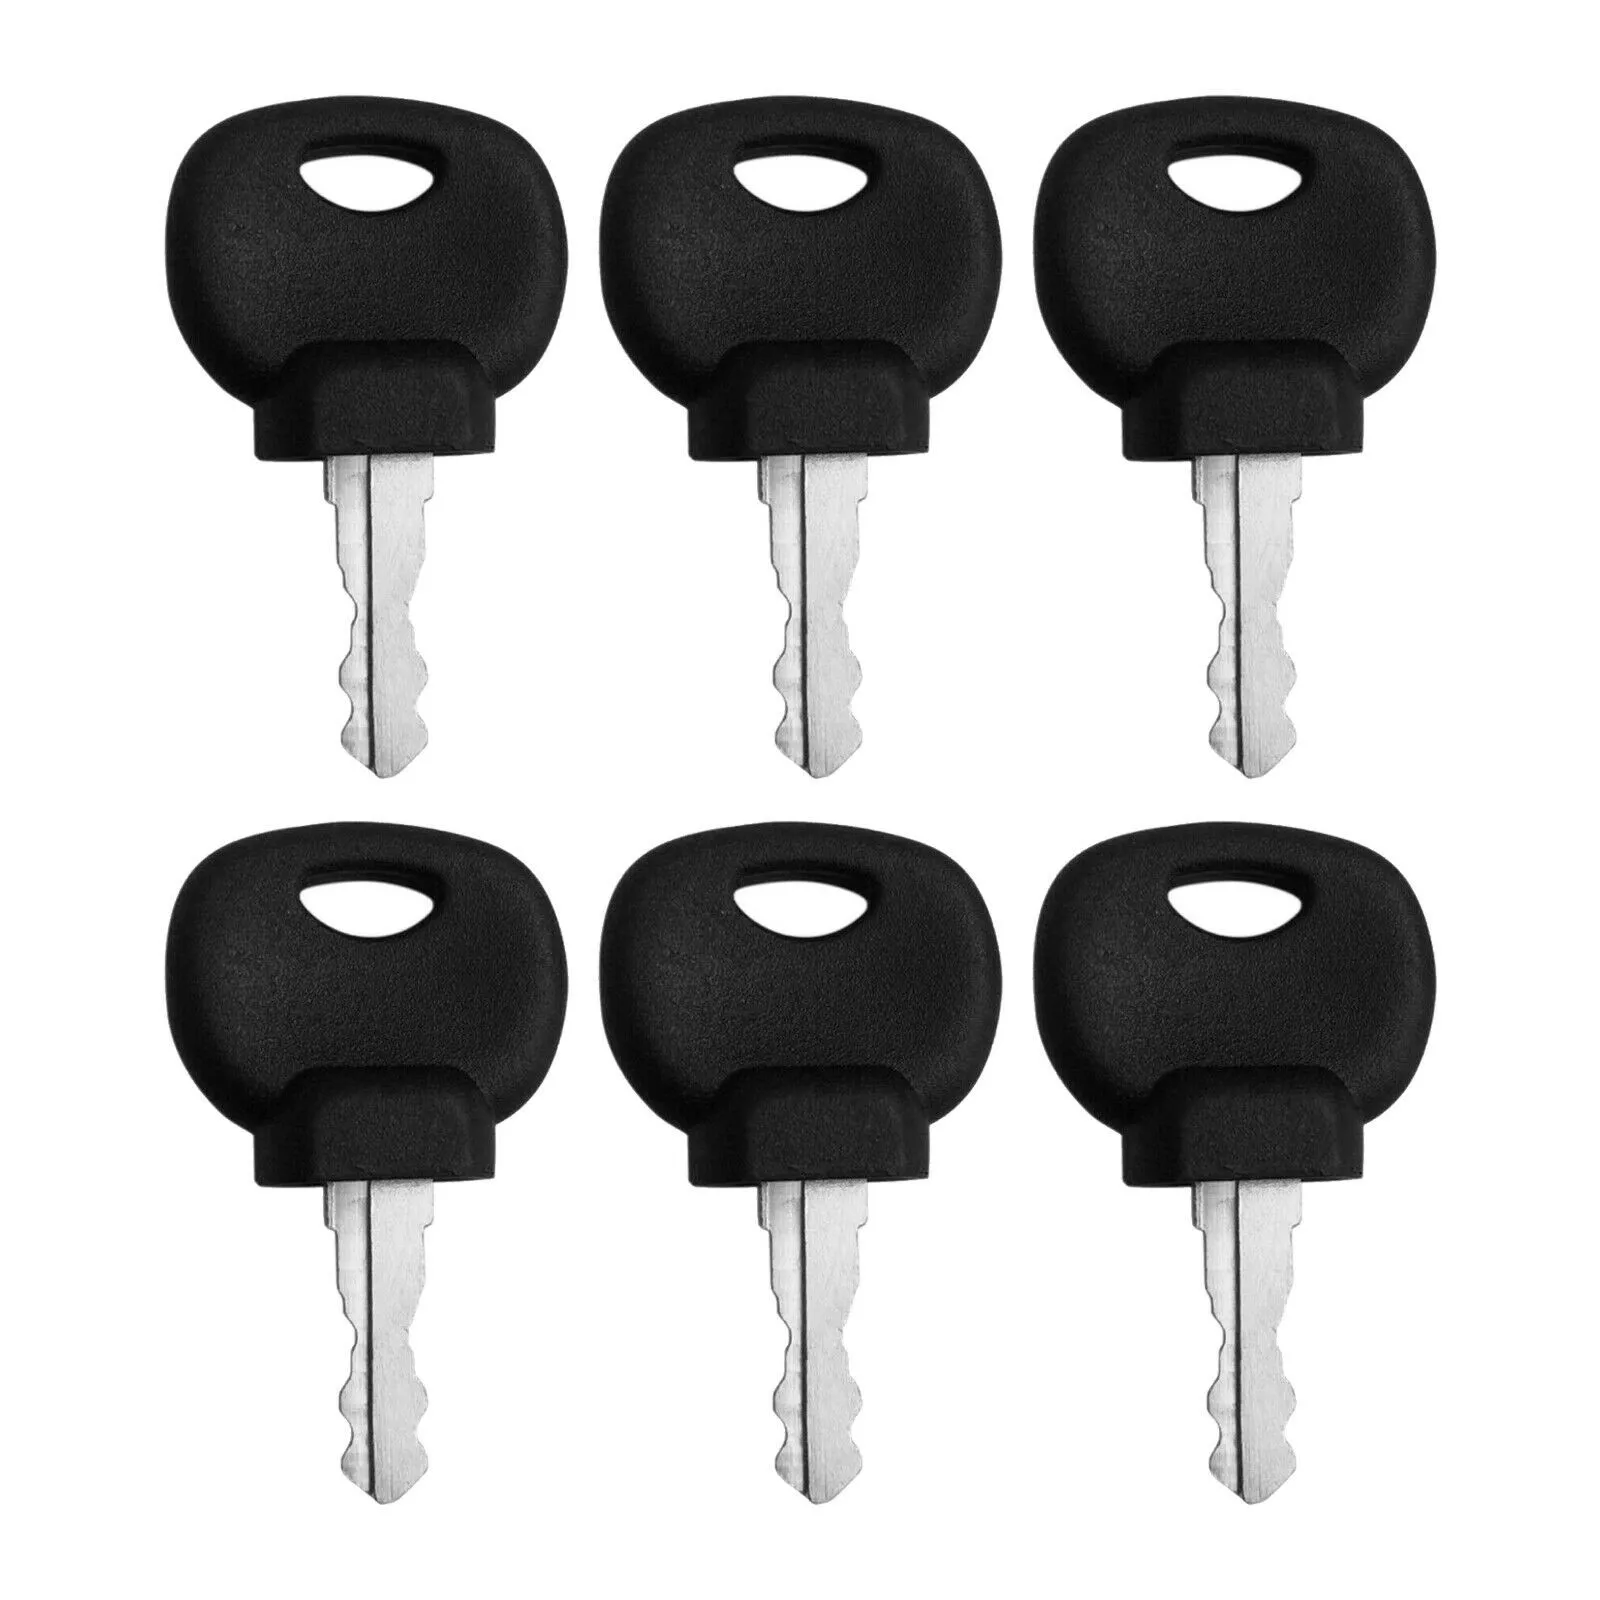 6Pcs Ignition Key Plant Application Spare 14607 For Jcb Bomag Hatz Manitou Tractor Car Replacement Parts Accessories